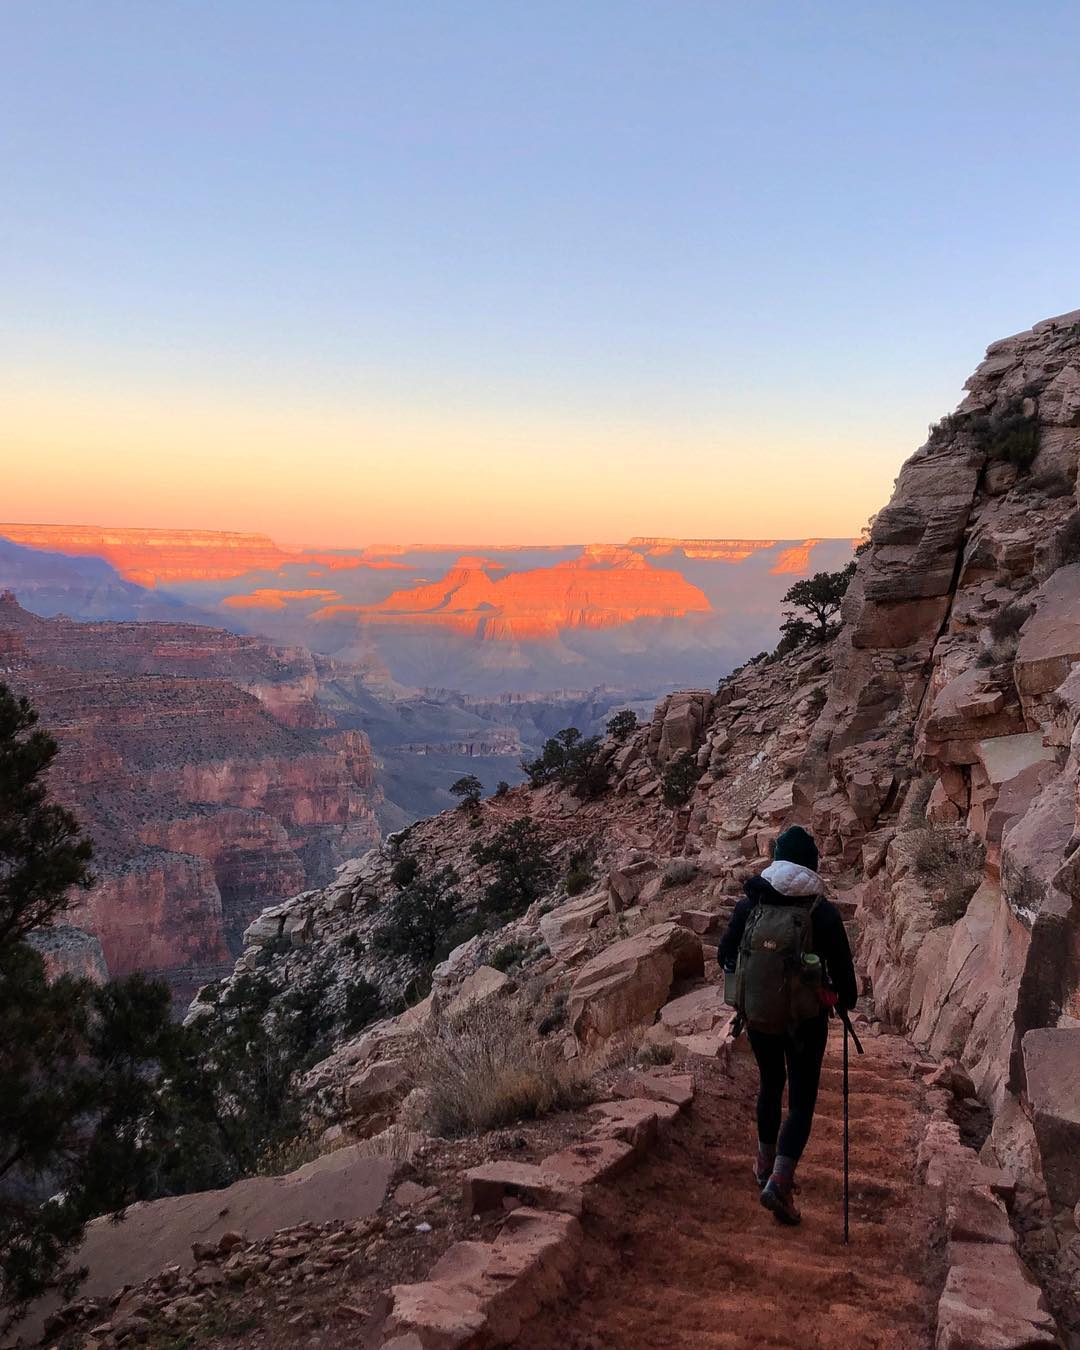 6 Great Summer Hikes in the United States - South Kaibob and Bright Angel Trails in Grand Canyon National Park, Arizona